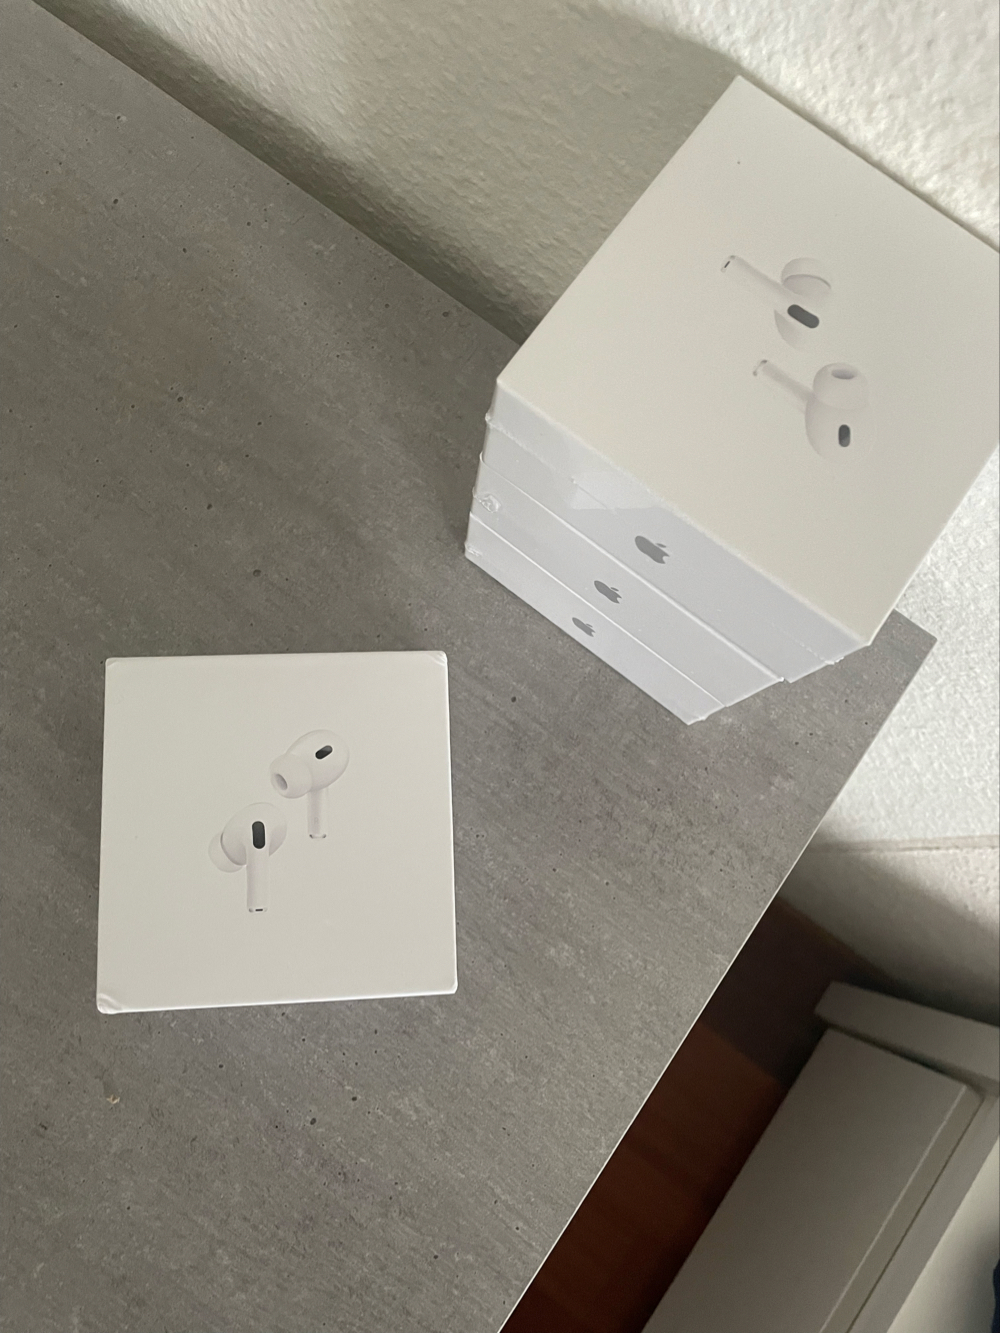 Airpods Pro2